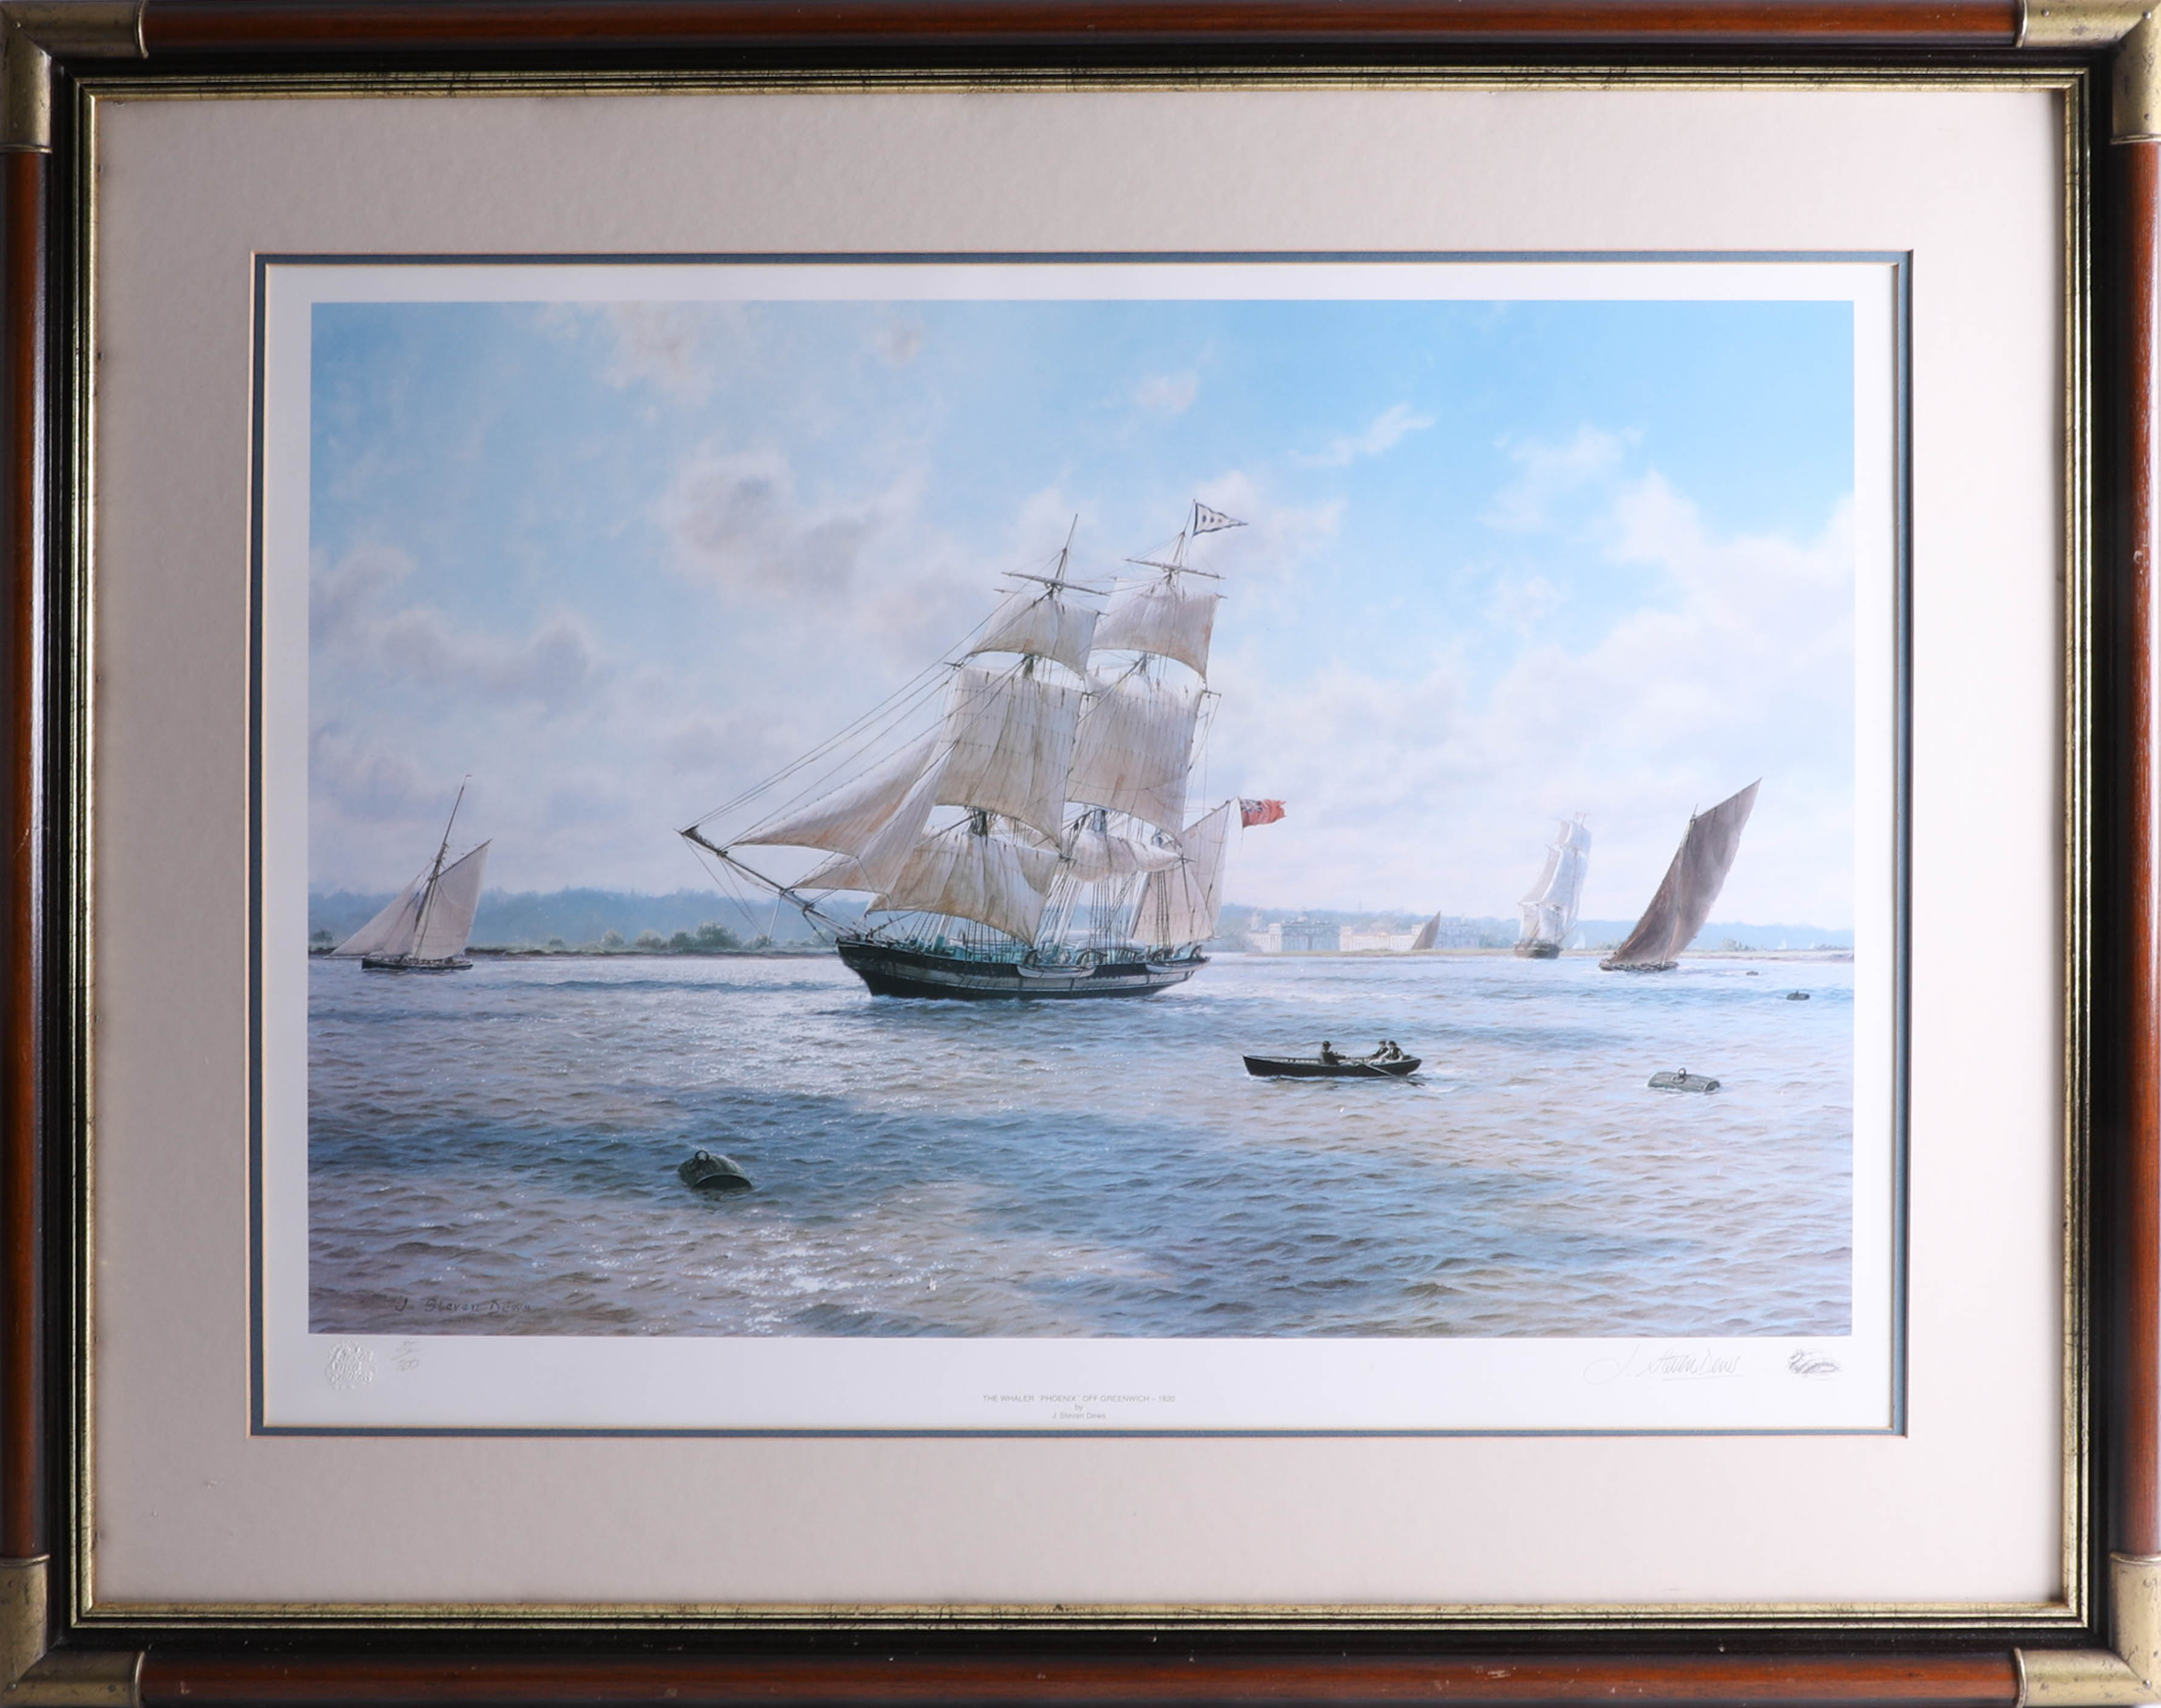 A collection of J.Steven Dews prints including 'Shamrock V racing off Yarmouth', 'The Whaler Phoenix - Image 2 of 5